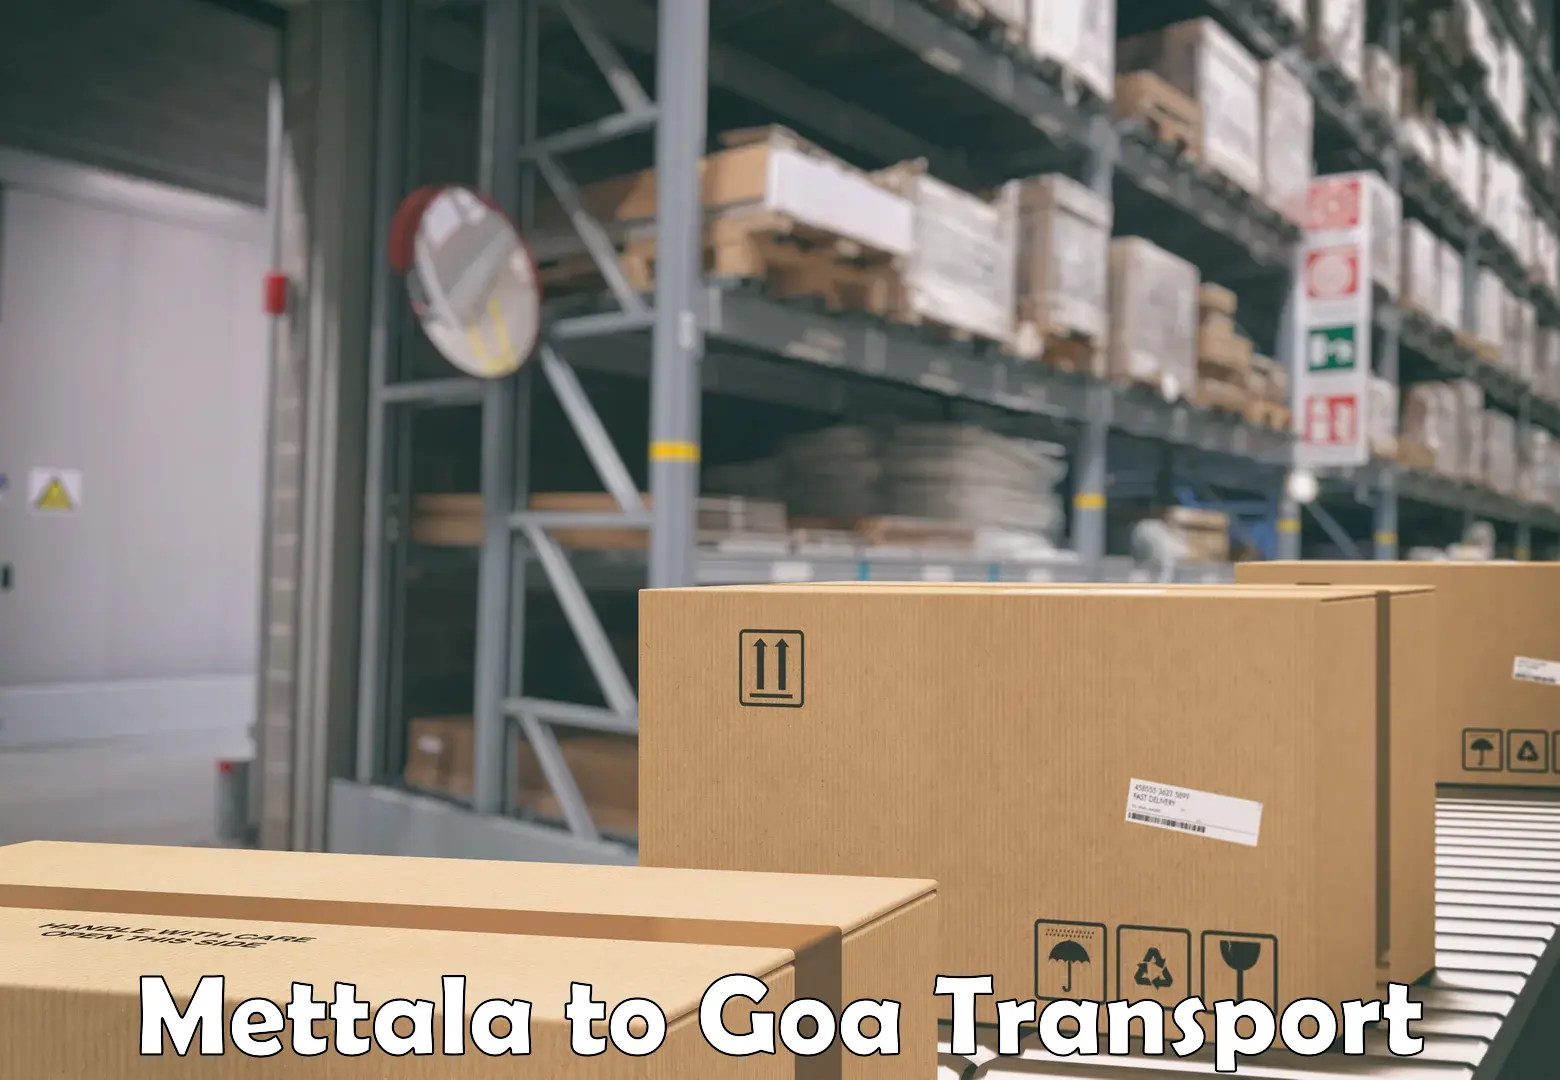 Daily transport service Mettala to Goa